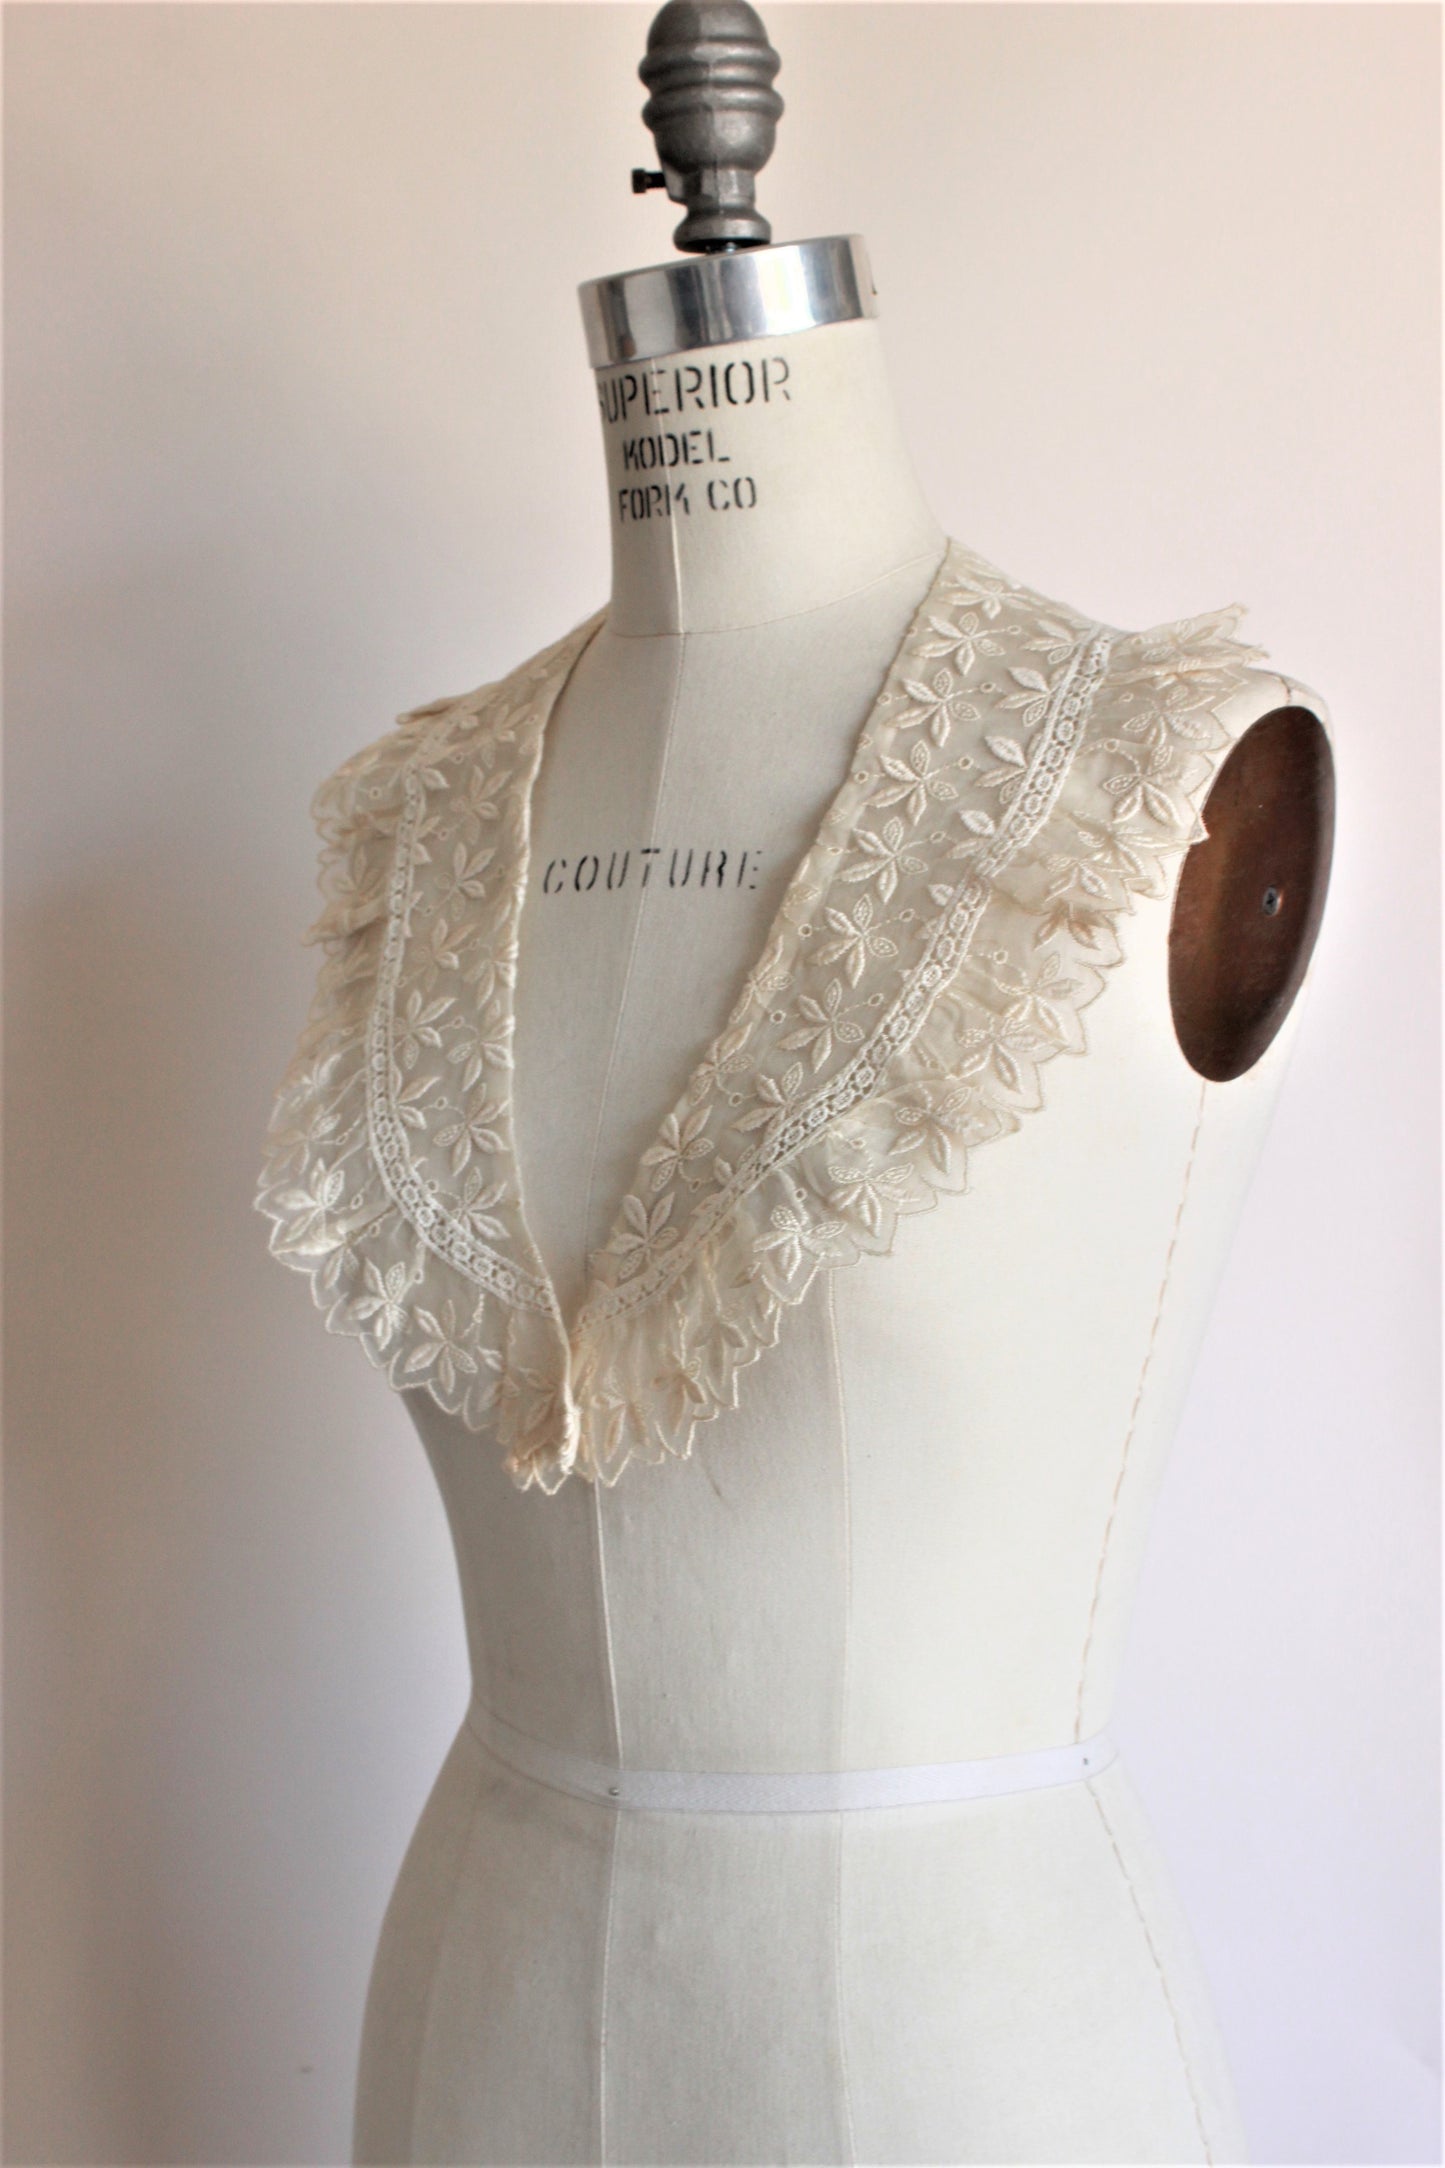 Vintage Early 1900s Collar in Ivory Lace